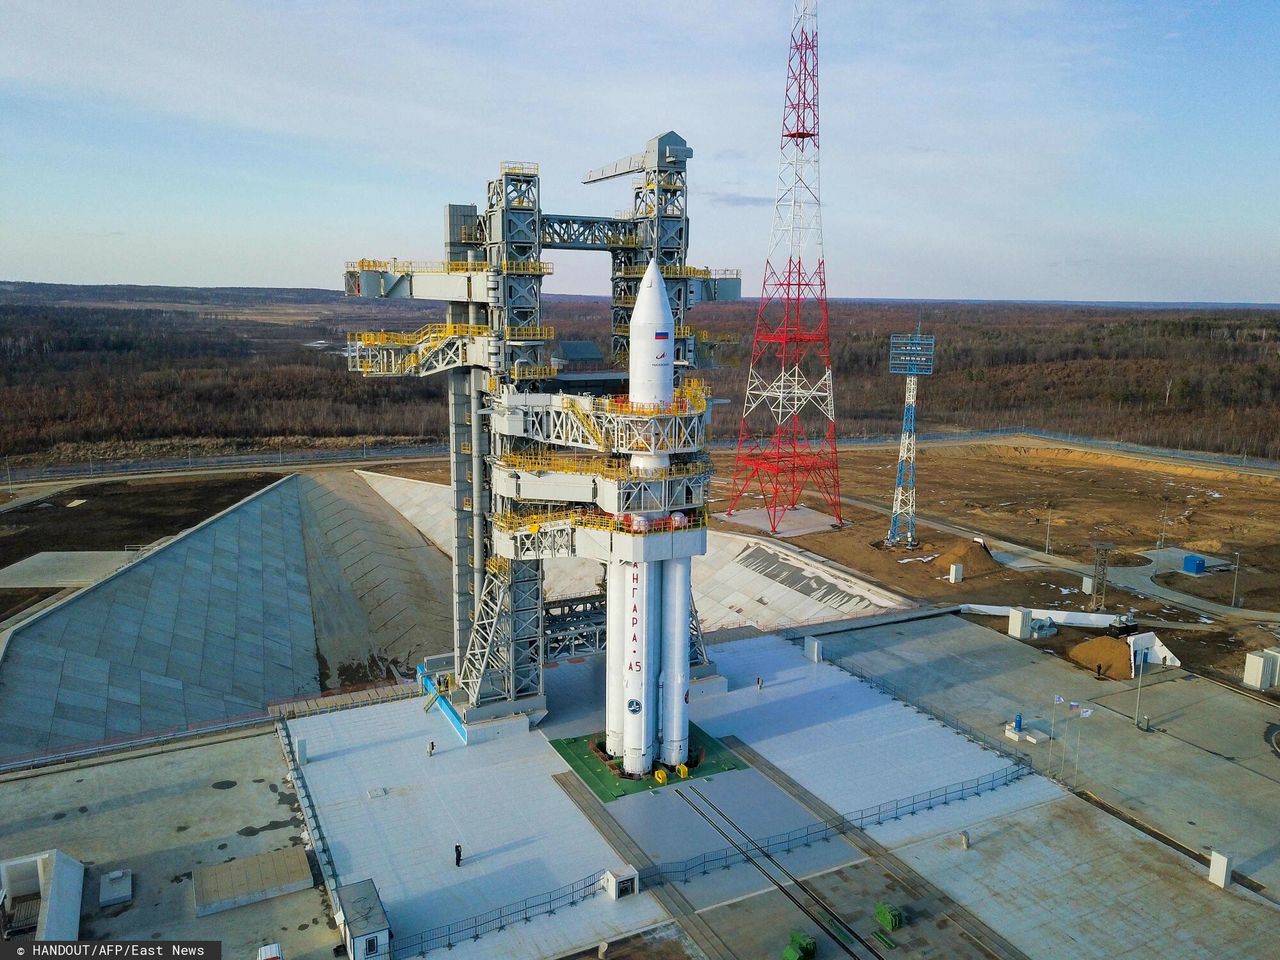 Angara A5 rocket on the launch pad of the Vostochny Cosmodrome.